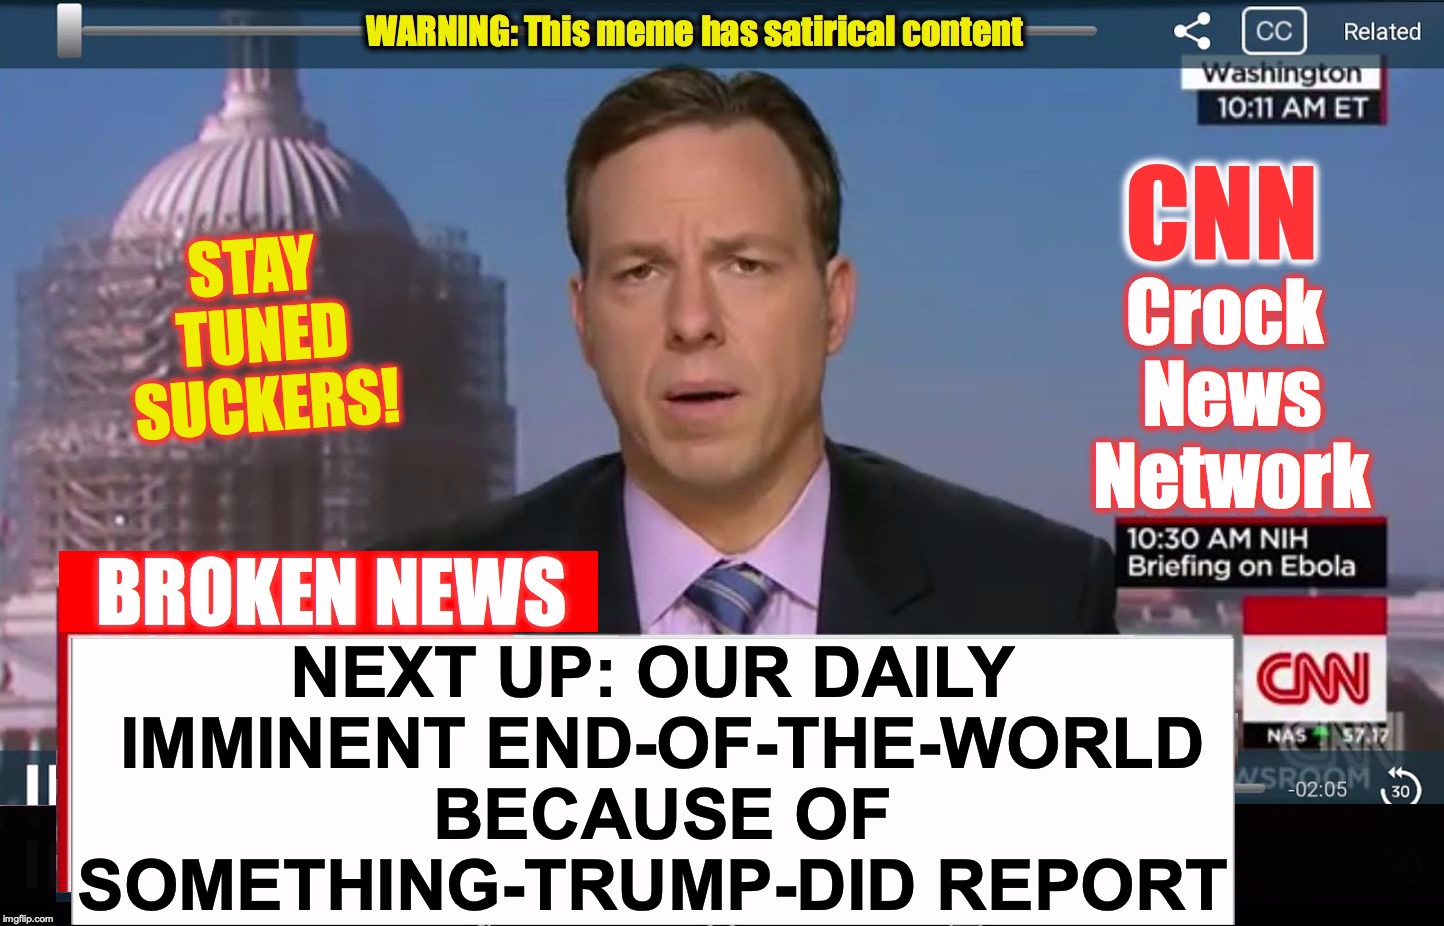 CNN Crock News Network | STAY TUNED SUCKERS! NEXT UP: OUR DAILY IMMINENT END-OF-THE-WORLD BECAUSE OF SOMETHING-TRUMP-DID REPORT | image tagged in cnn crock news network | made w/ Imgflip meme maker